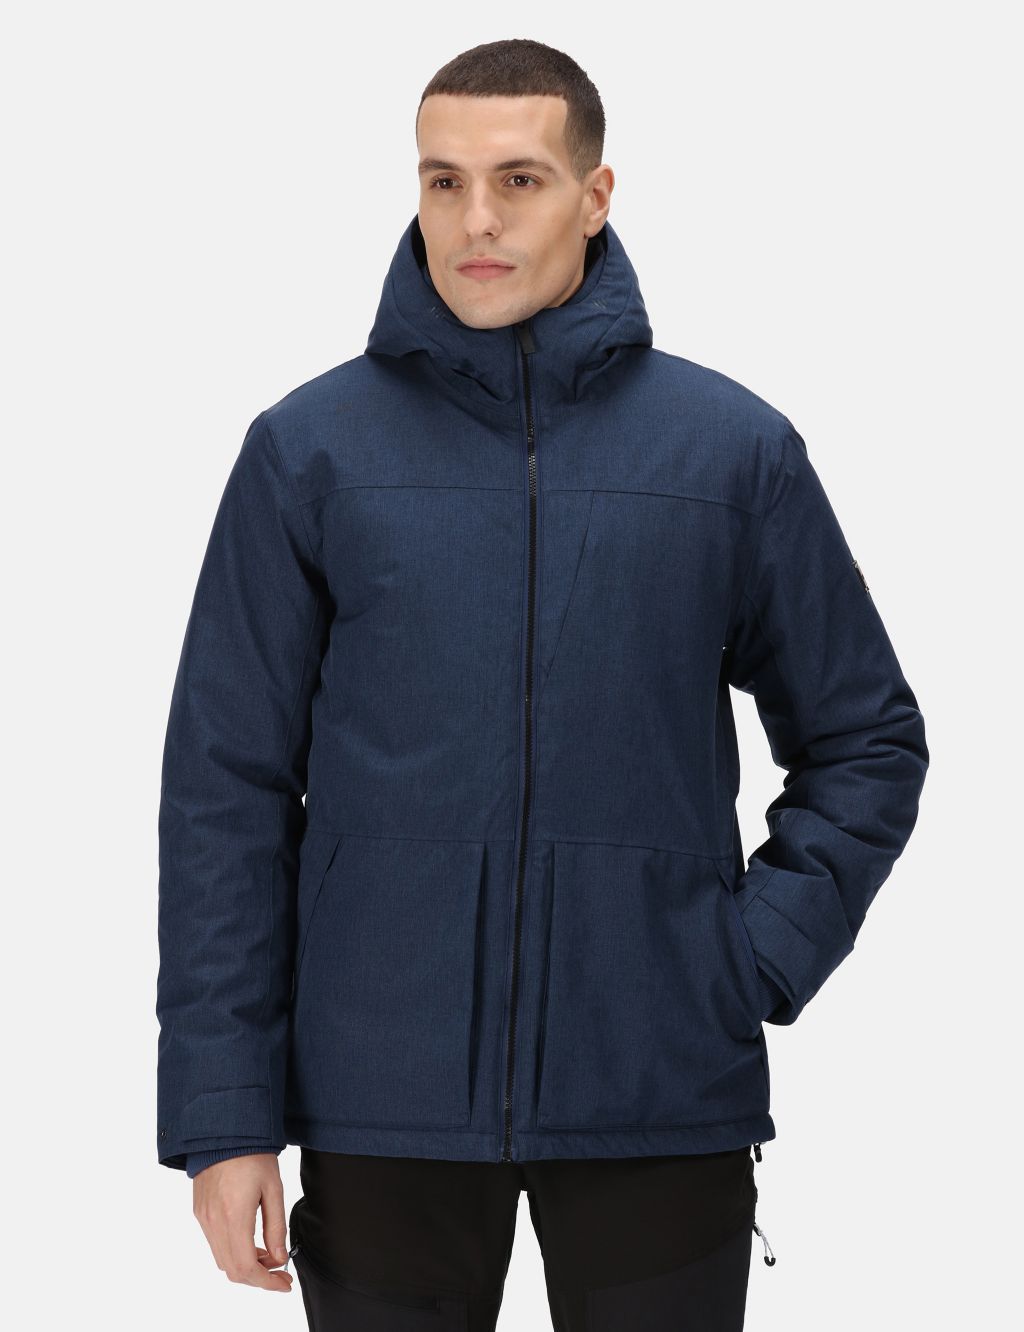 Volter Shield IV Heated Waterproof Jacket image 1